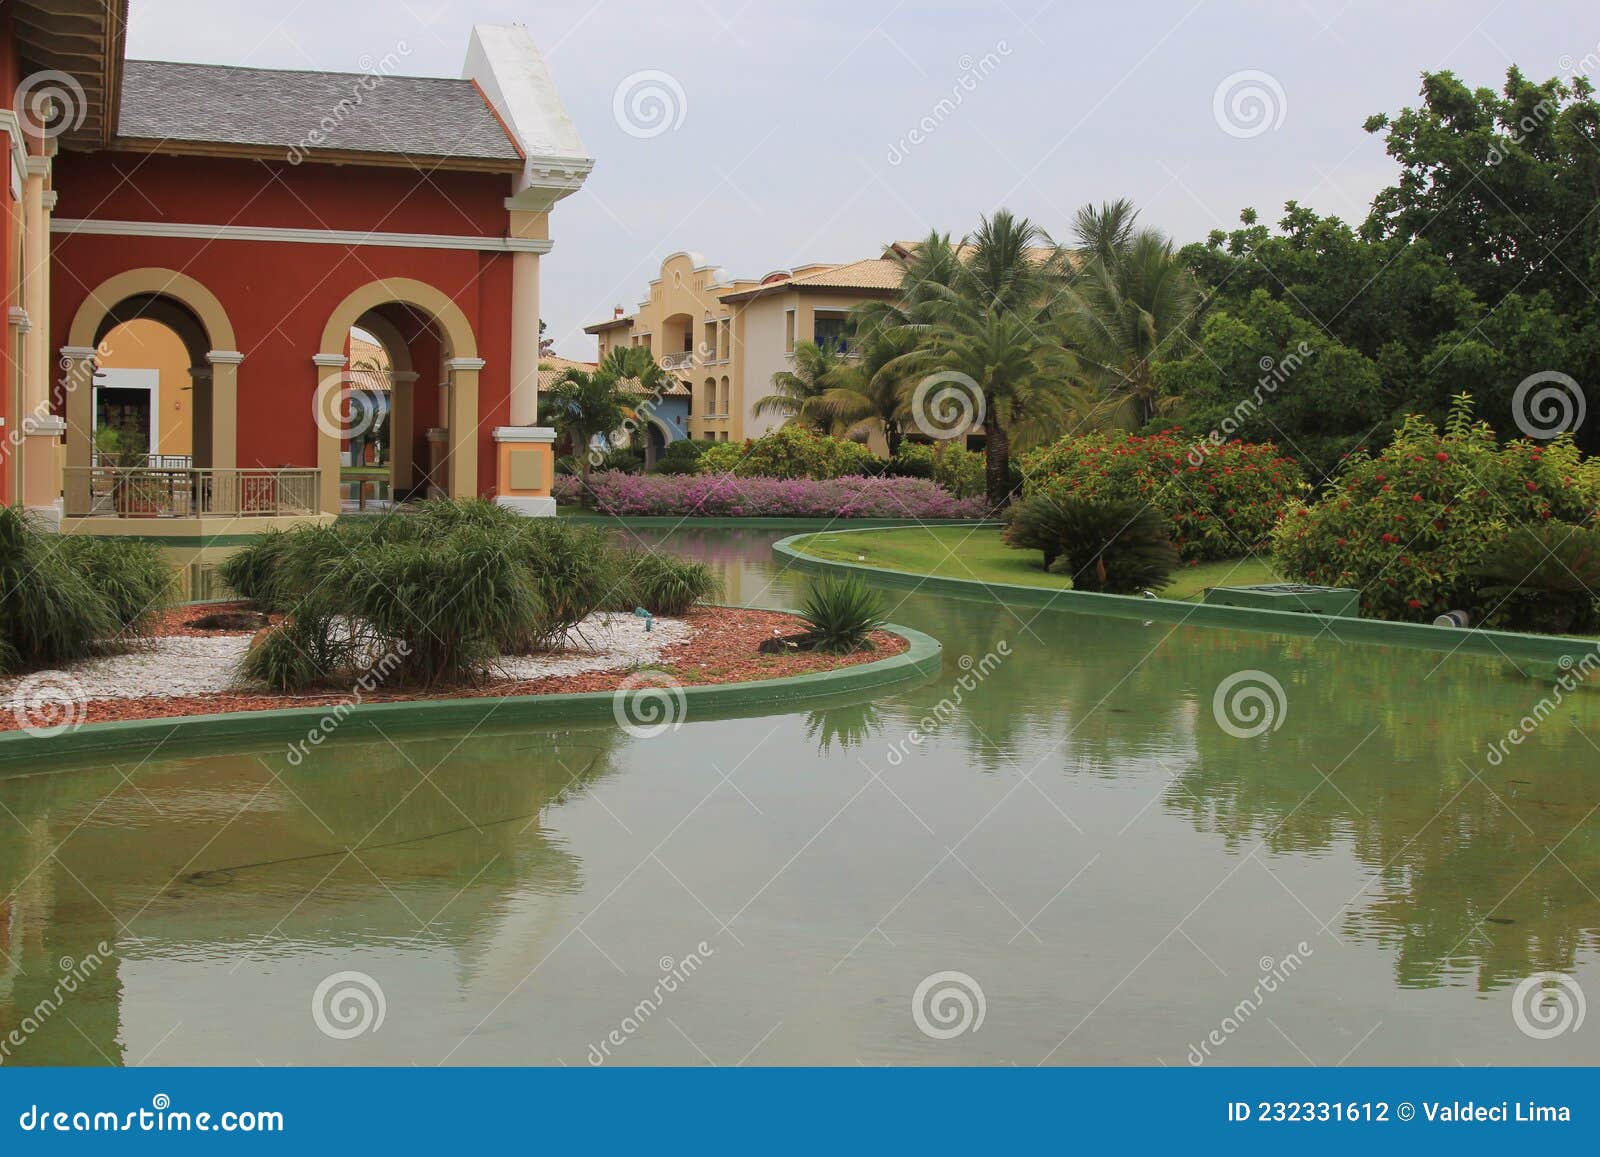 tropical garden with green grass, colorful houses in the background, a small lake with calm water and reflections abrir no google